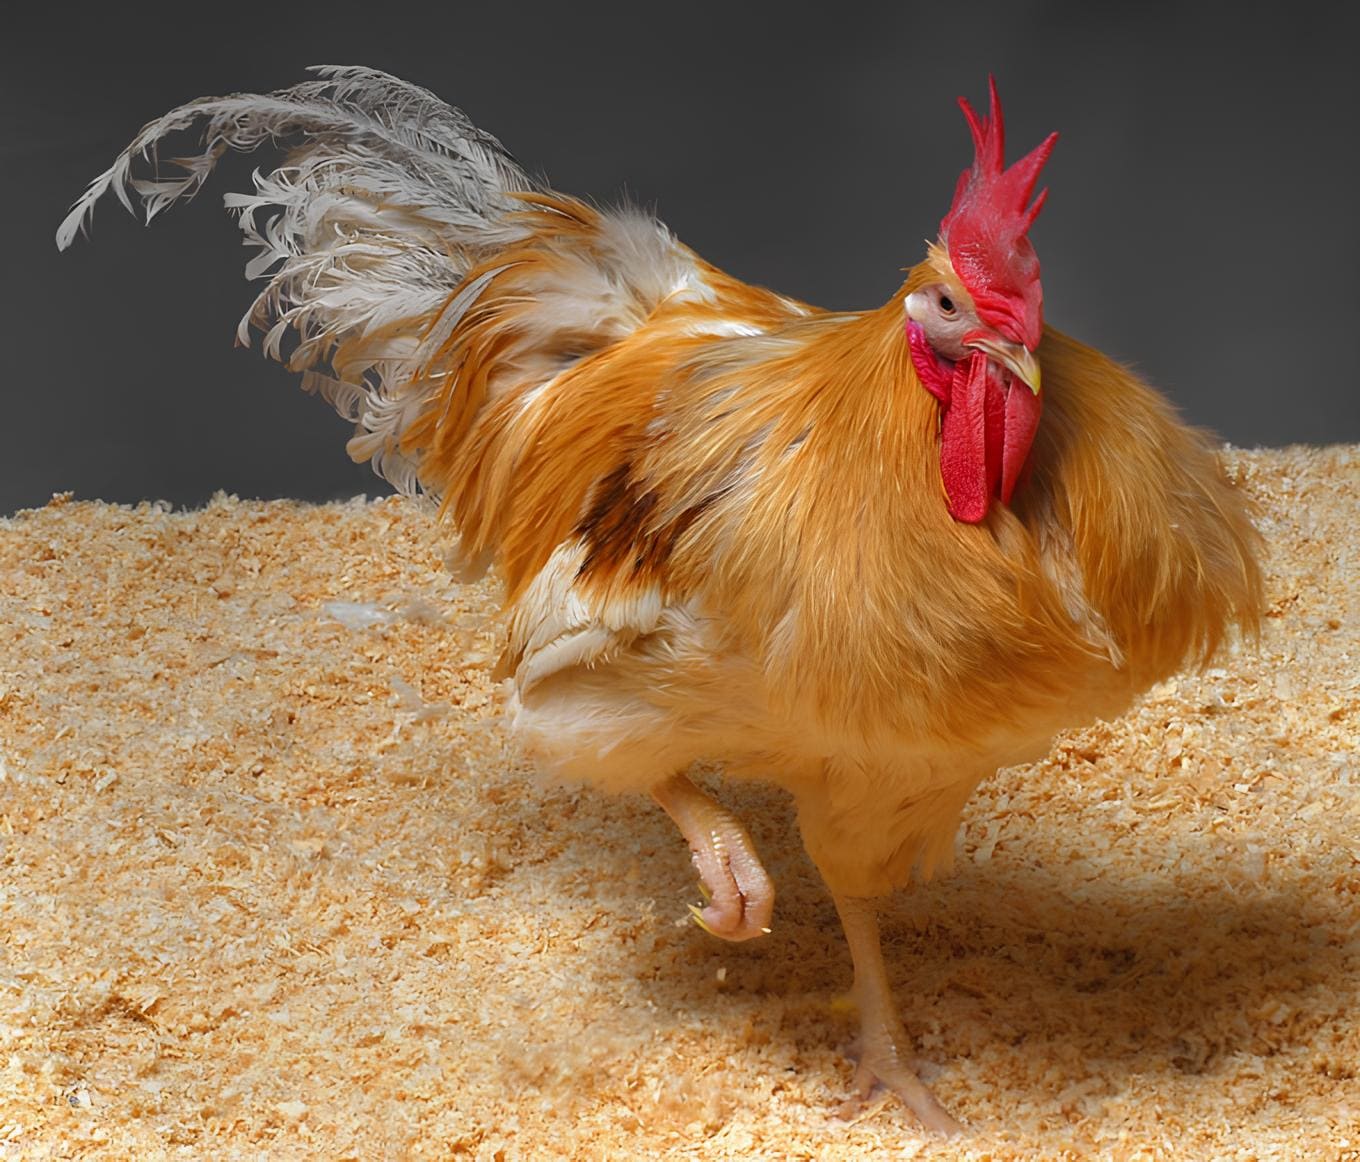 Gene Editing Can Make Chickens Resistant to Bird Flu